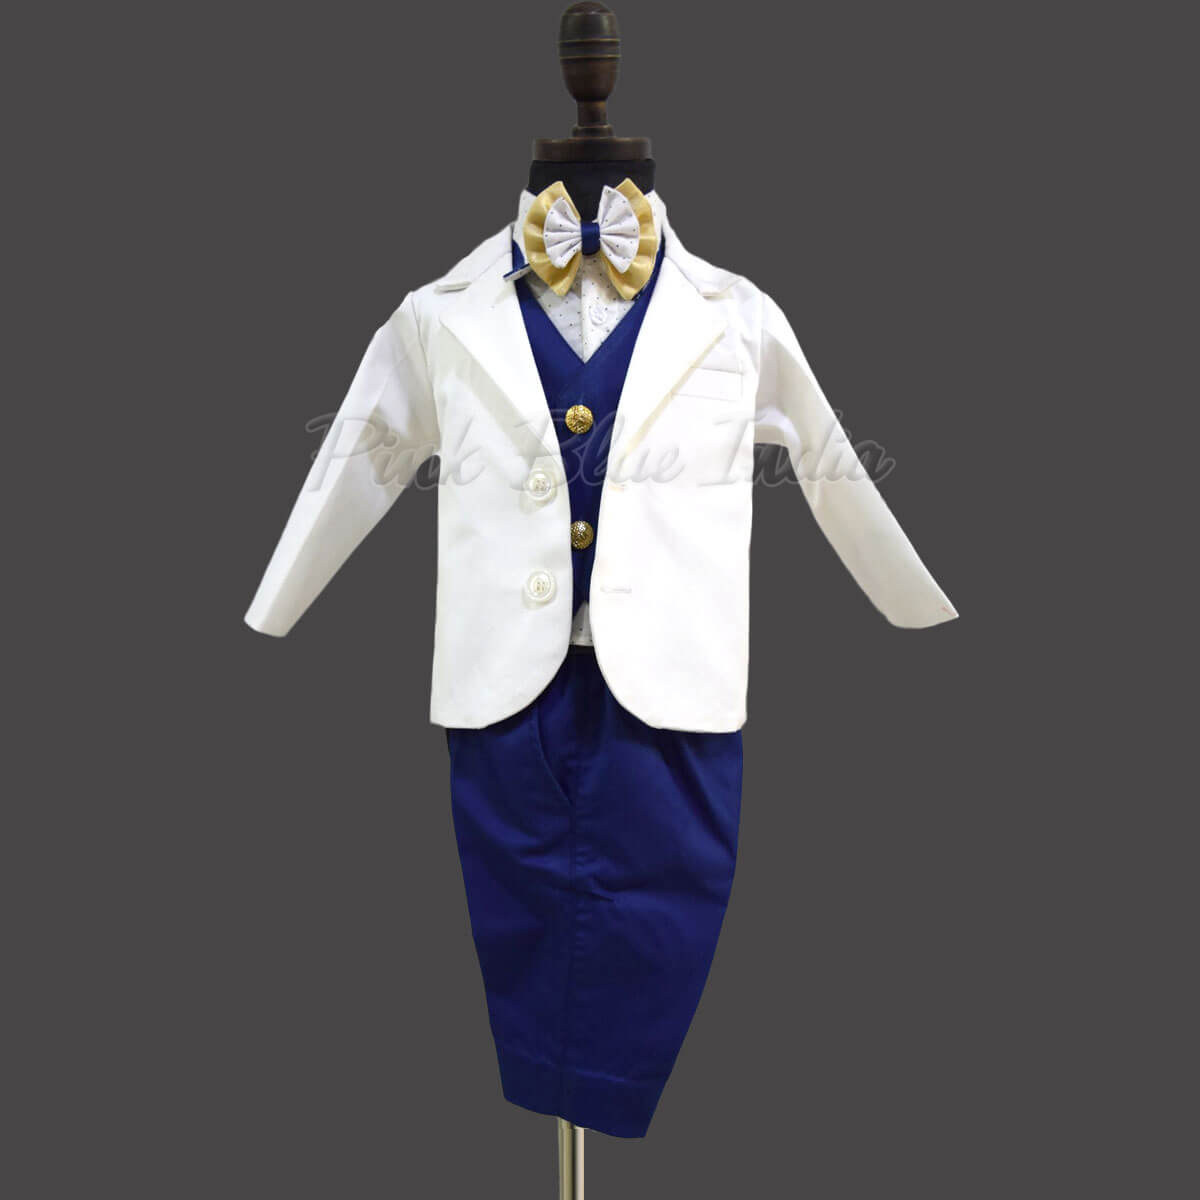 THE DUBAI STUDIO Baby Boy's Black and Blue Cotton Party Suits with Blazer+Pant+Tie  (Set of 3) : Amazon.in: Clothing & Accessories